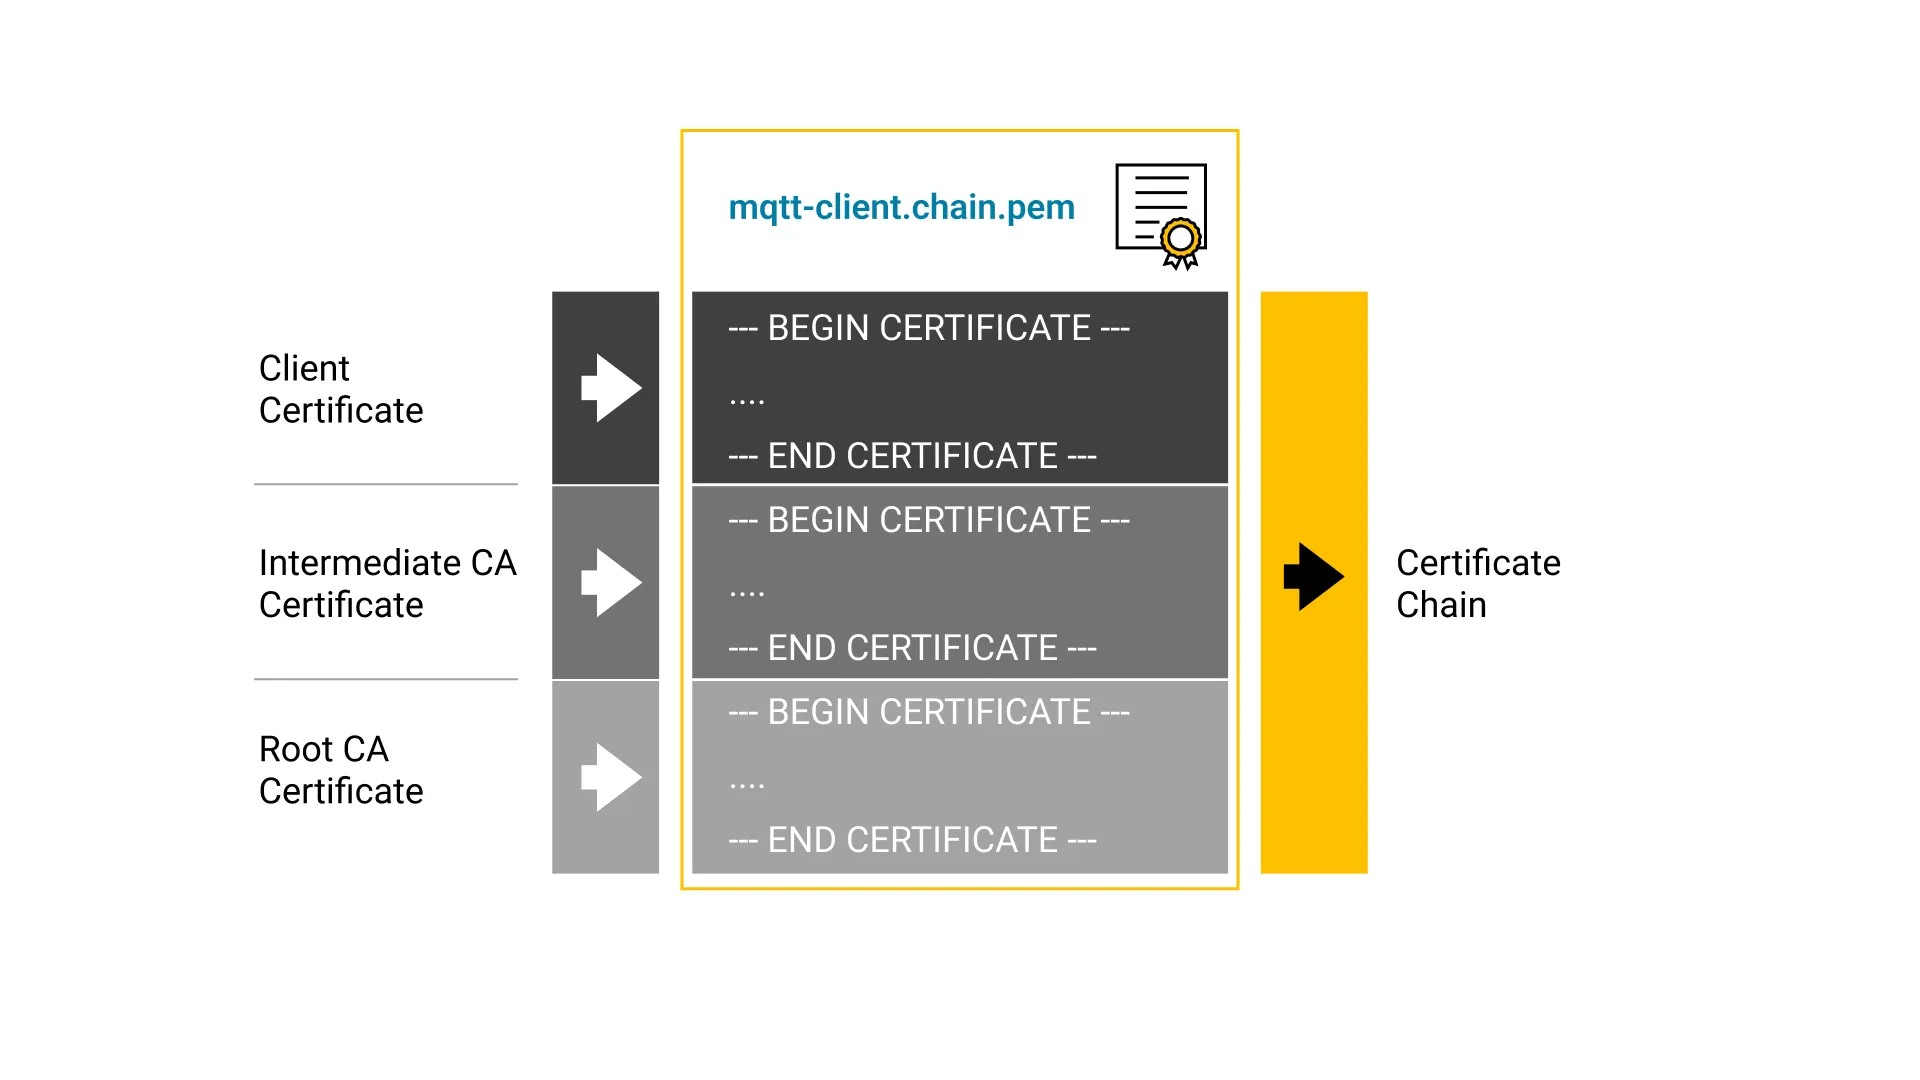 isualizing certificate hierarchy in KeyStore Explorer and the SAN extension.